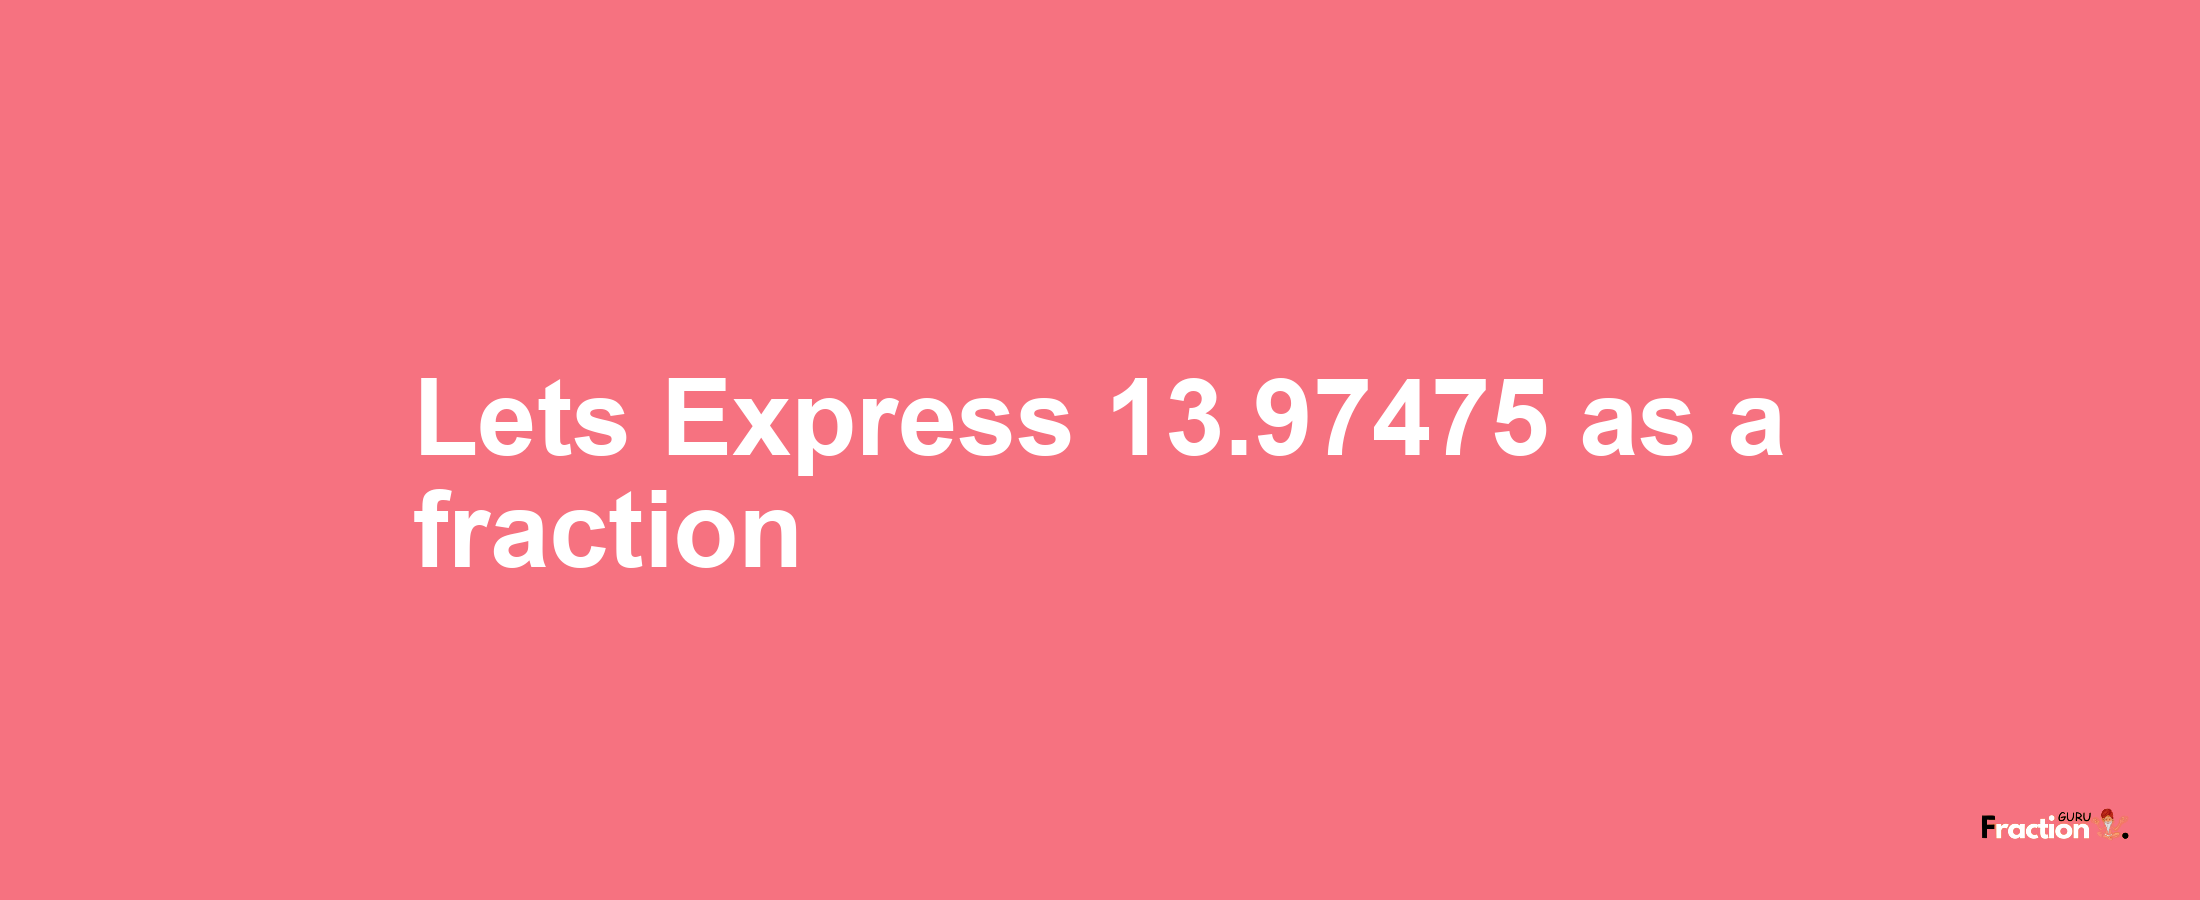 Lets Express 13.97475 as afraction